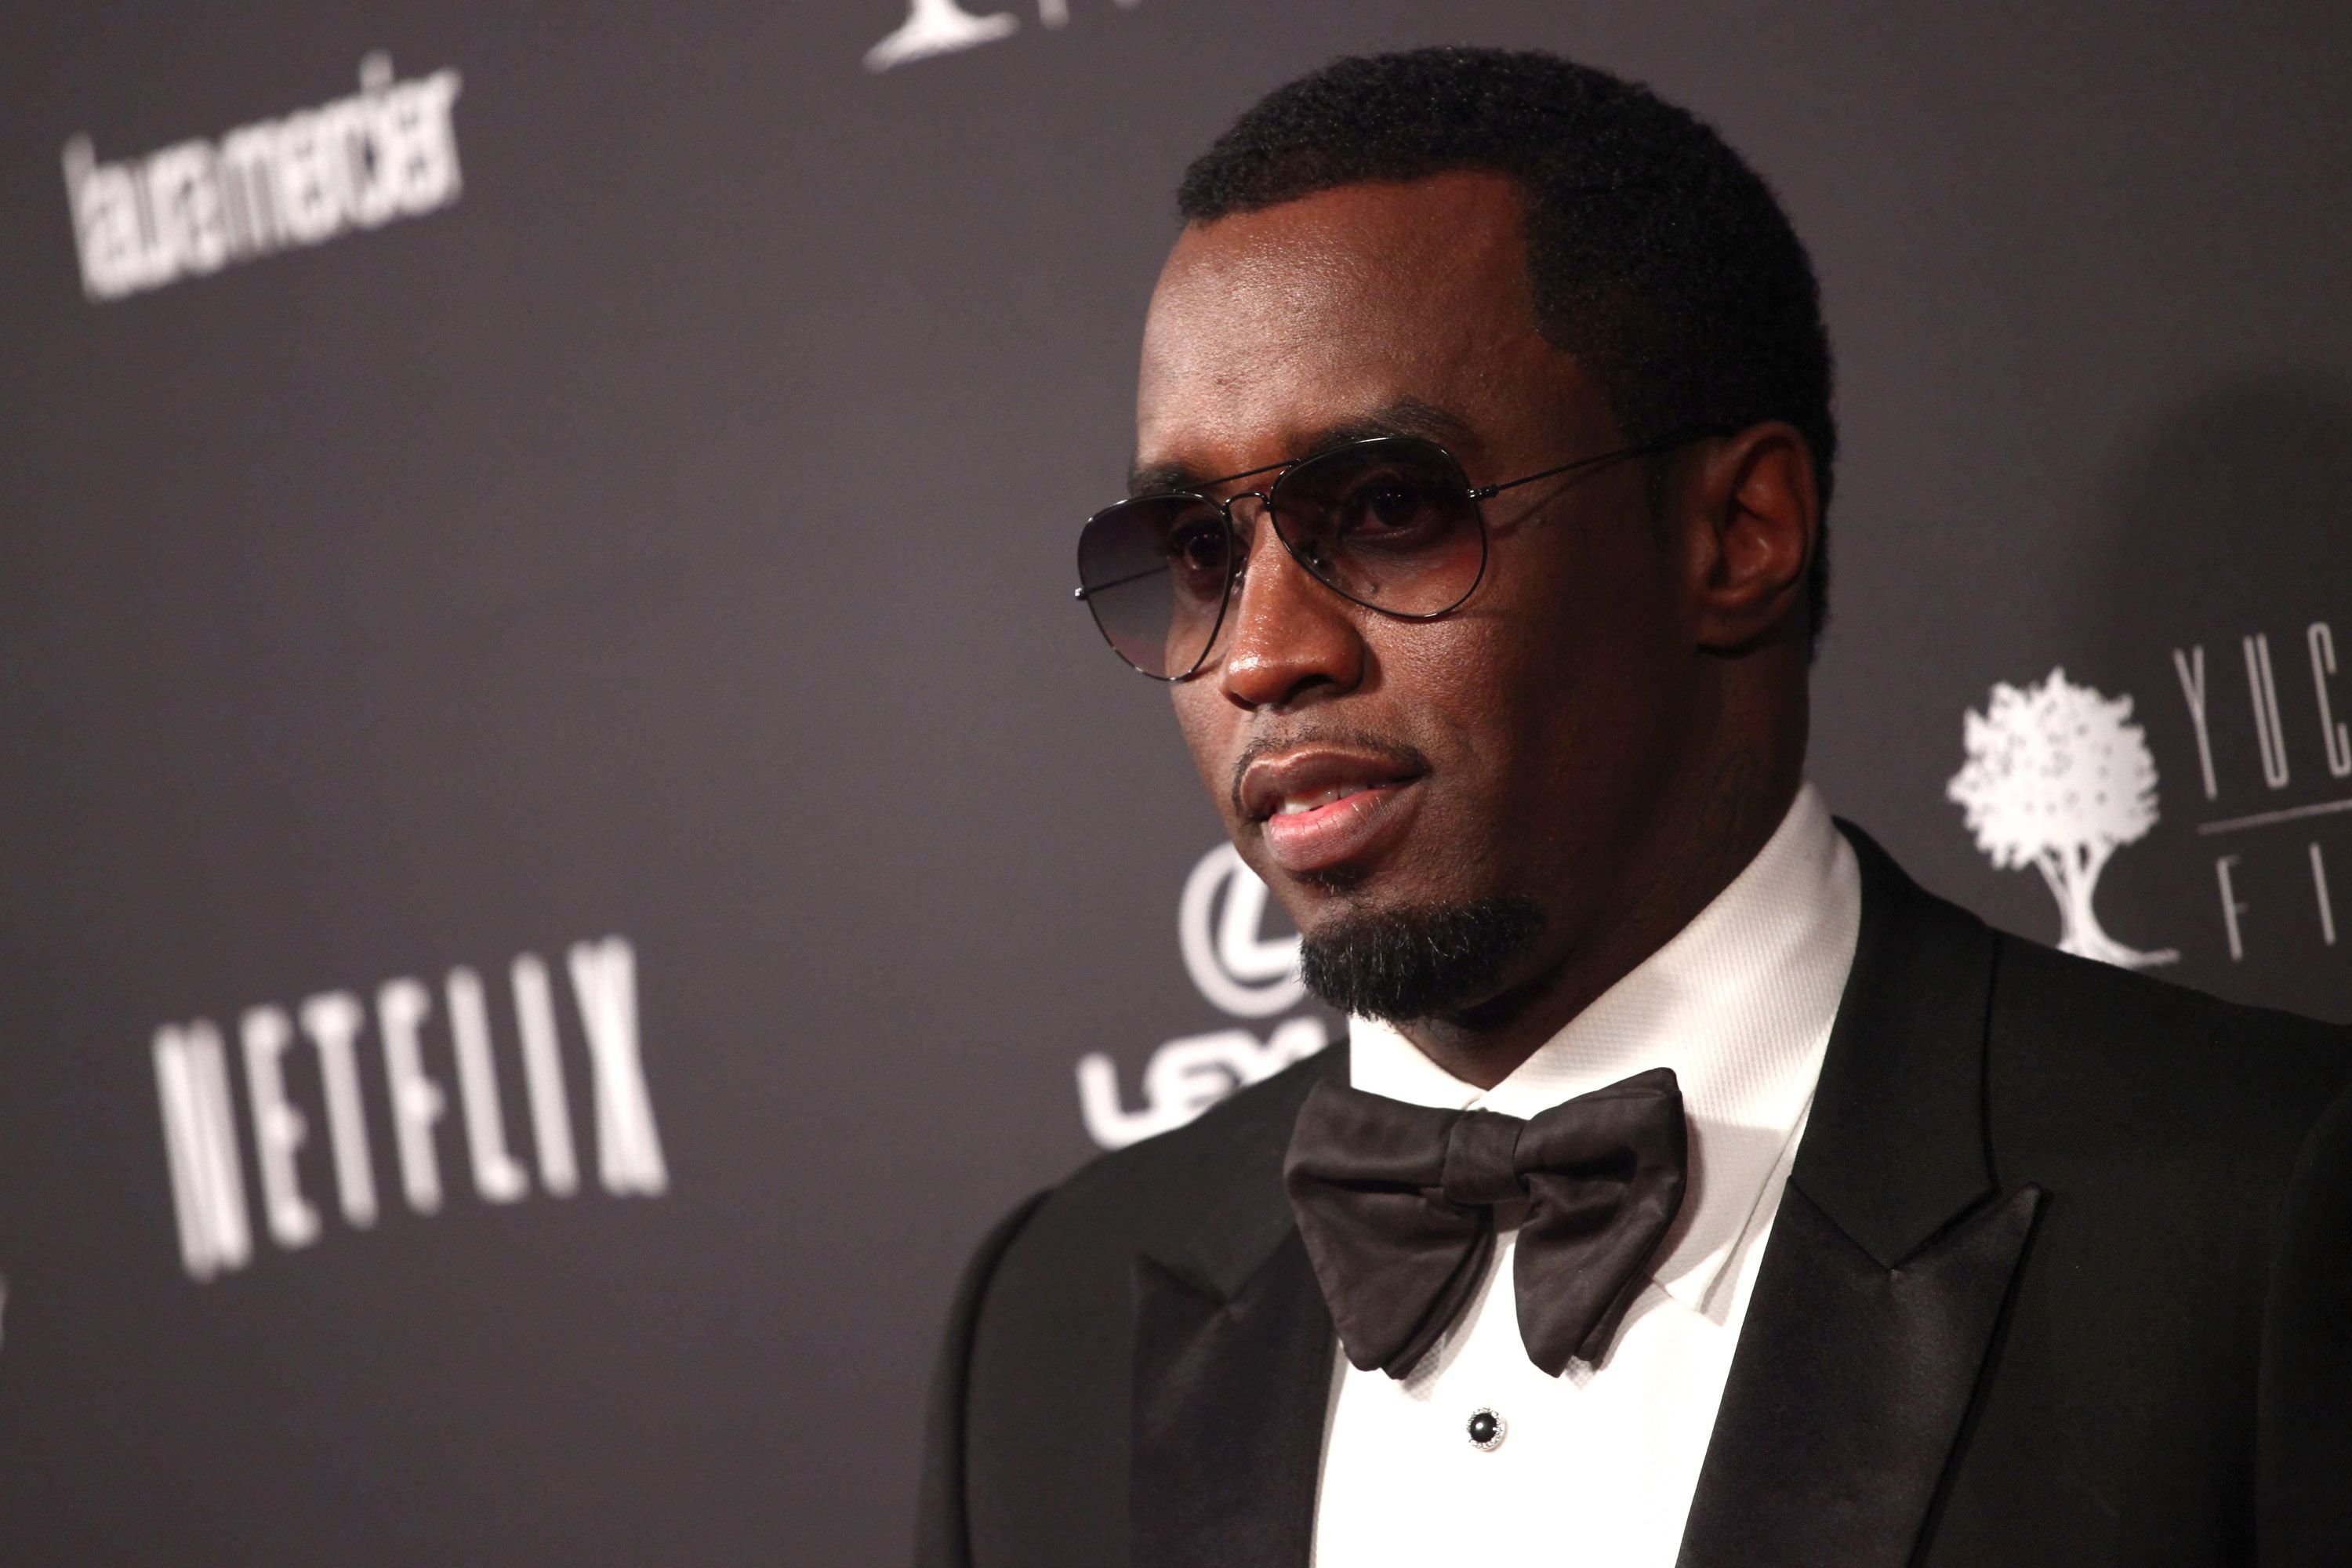 Sean Combs at the Weinstein Company's 2014 Golden Globe Awards after party on January 12, 2014 | Photo: Getty Images